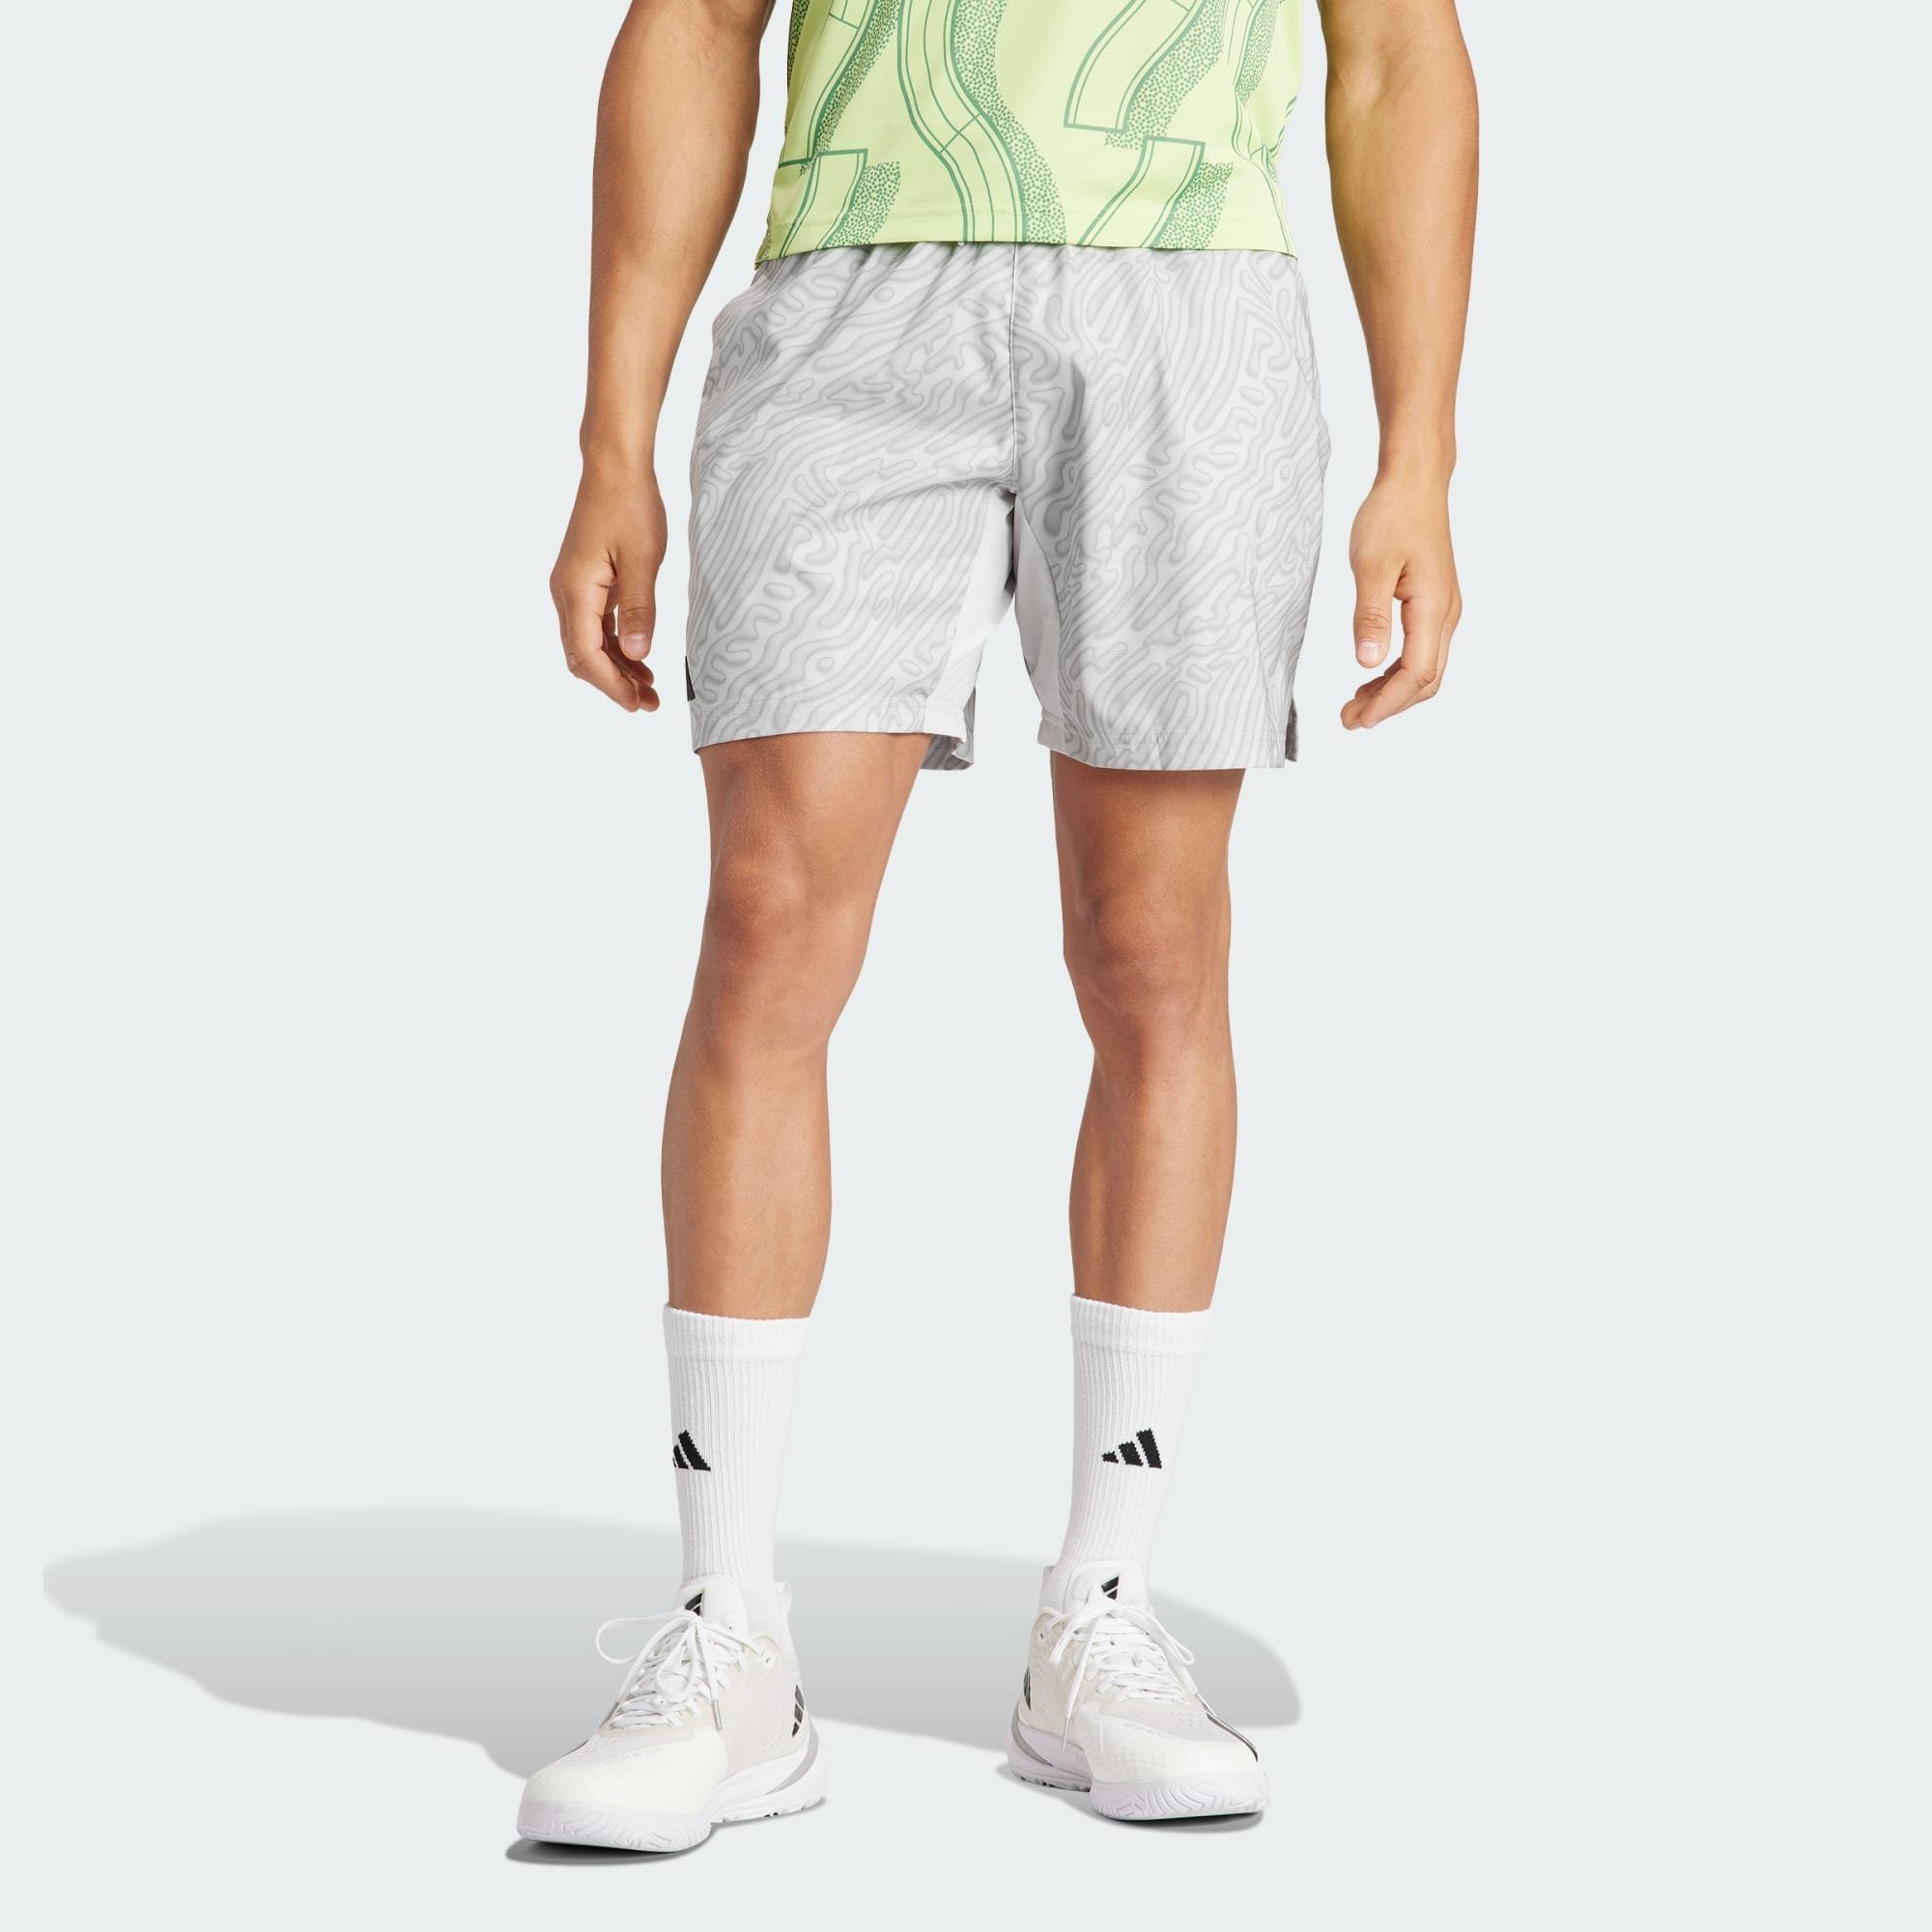 / Funktionsshorts Solid PRO adidas TENNIS PRINTED HEAT.RDY Charcoal Performance Grey SHORTS One 7-INCH Grey ERGO